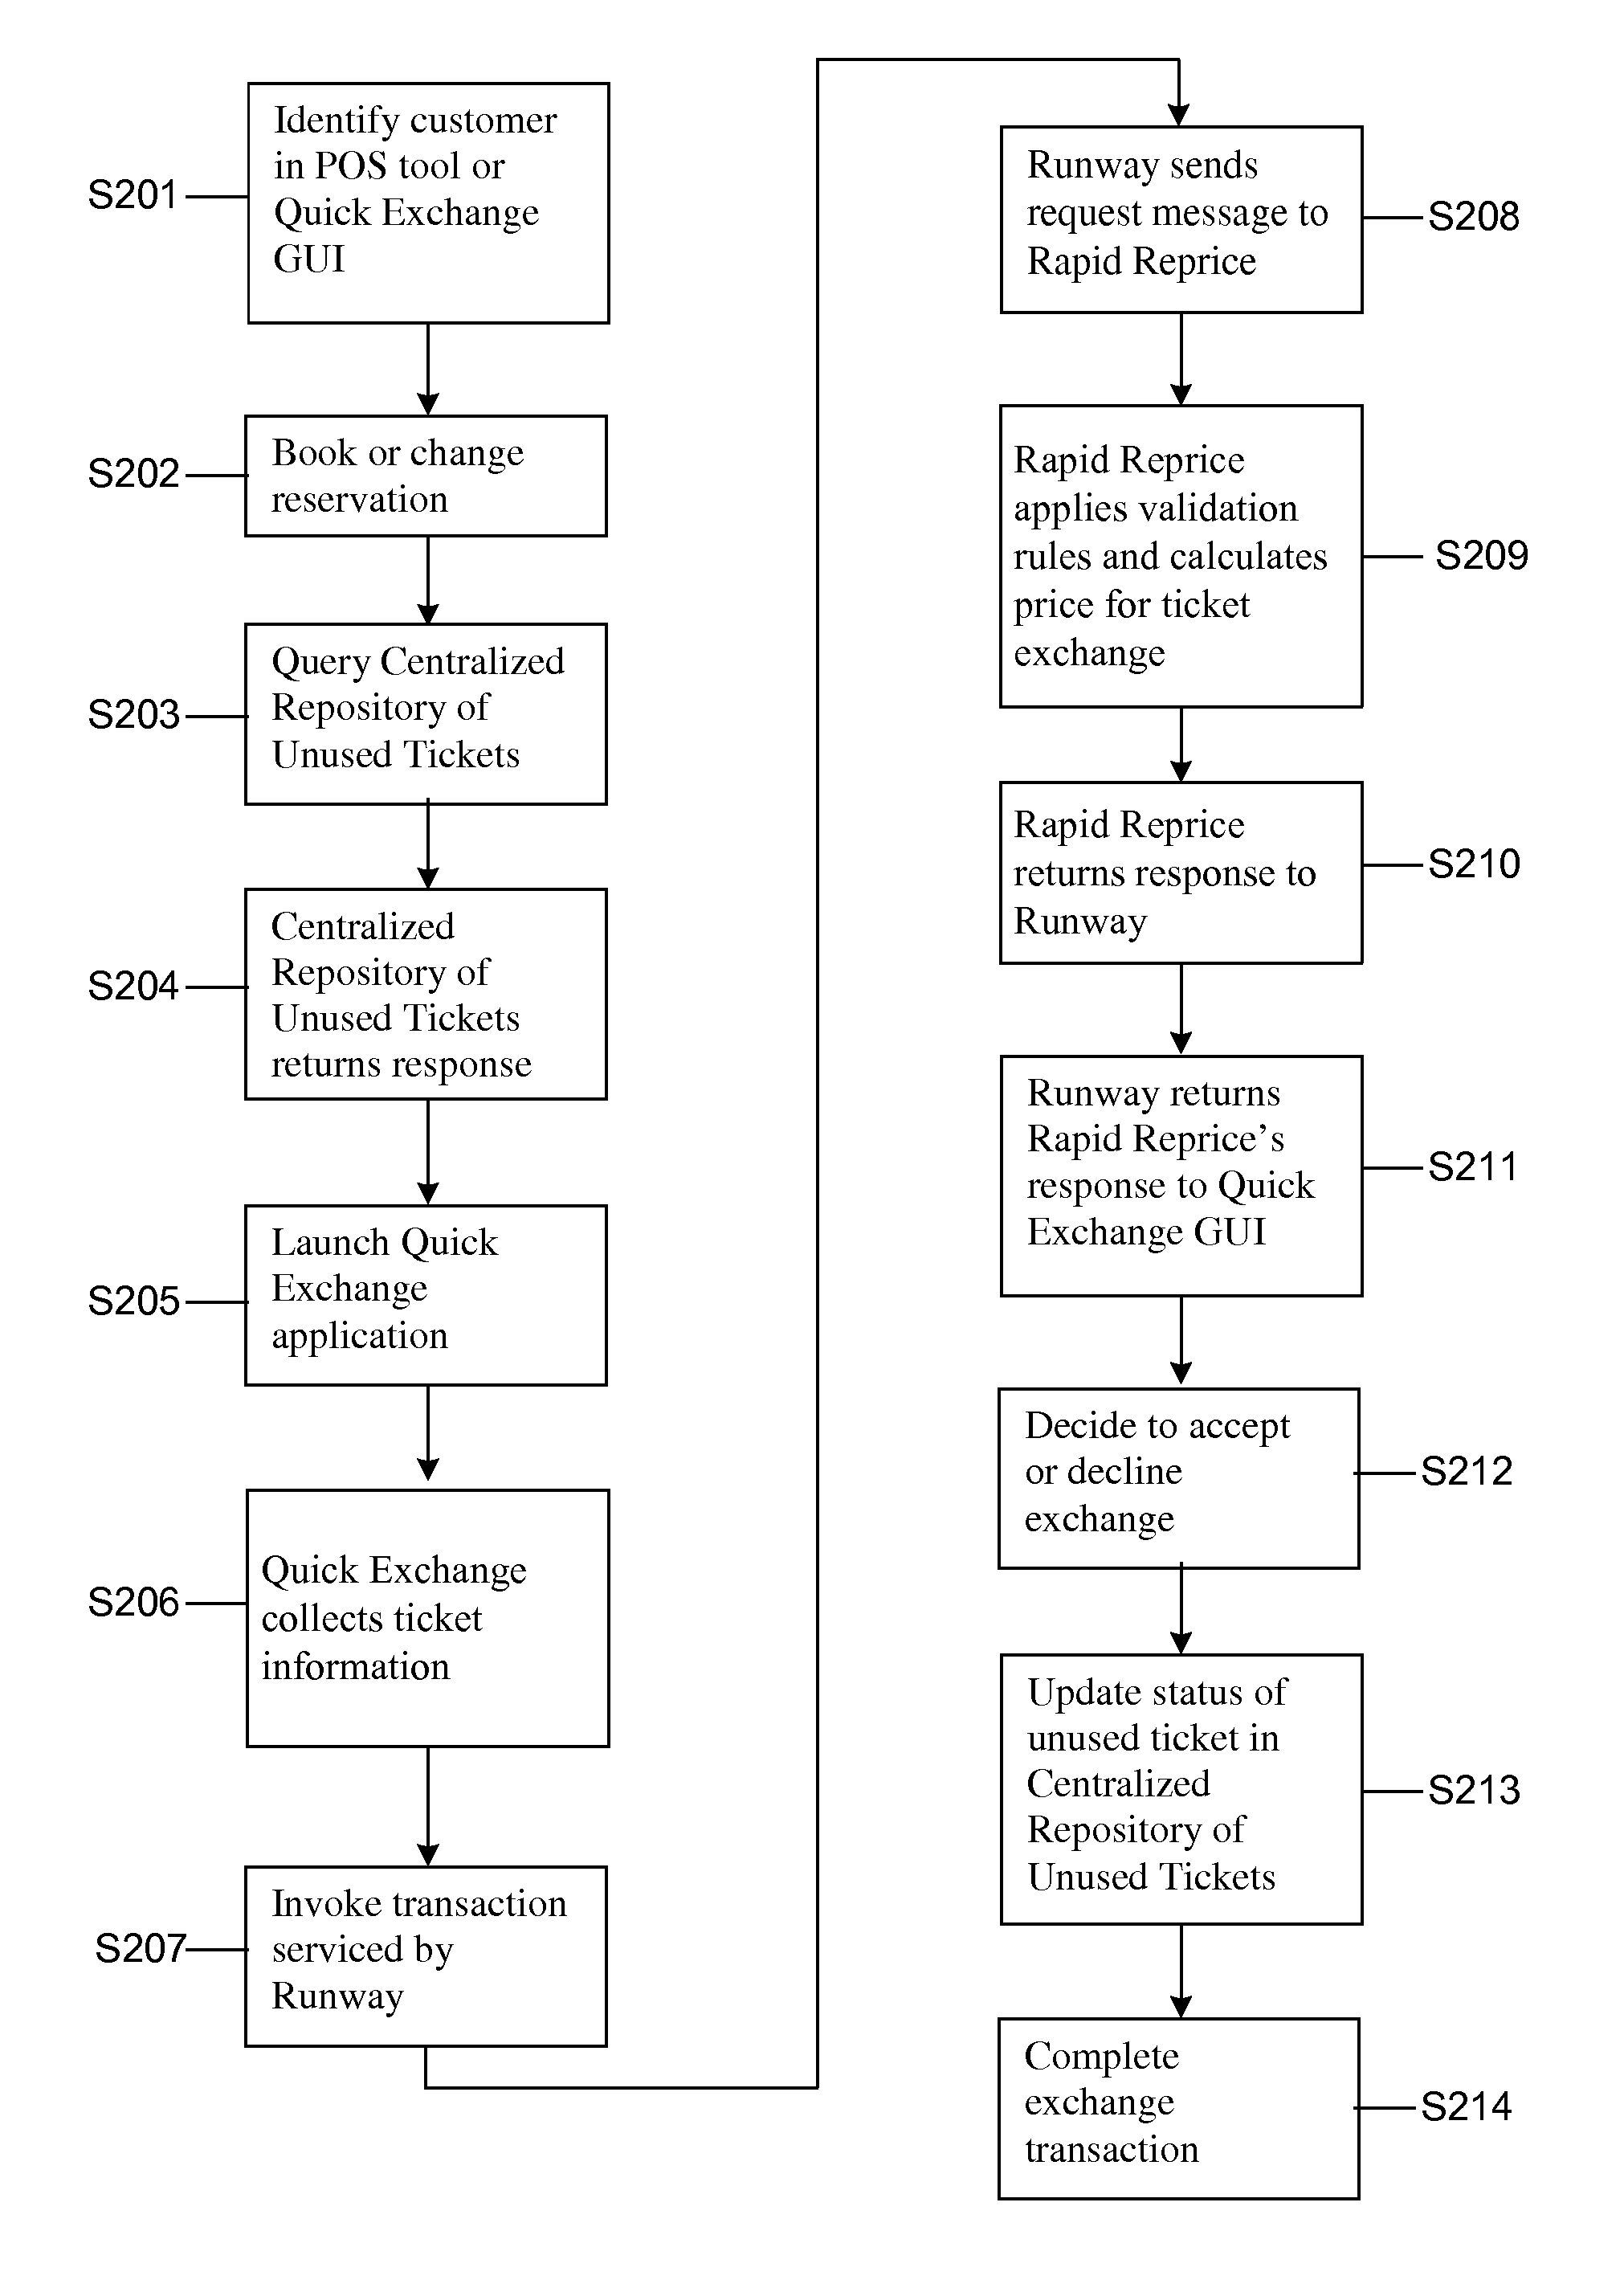 System and method for redemption and exchange of unused tickets